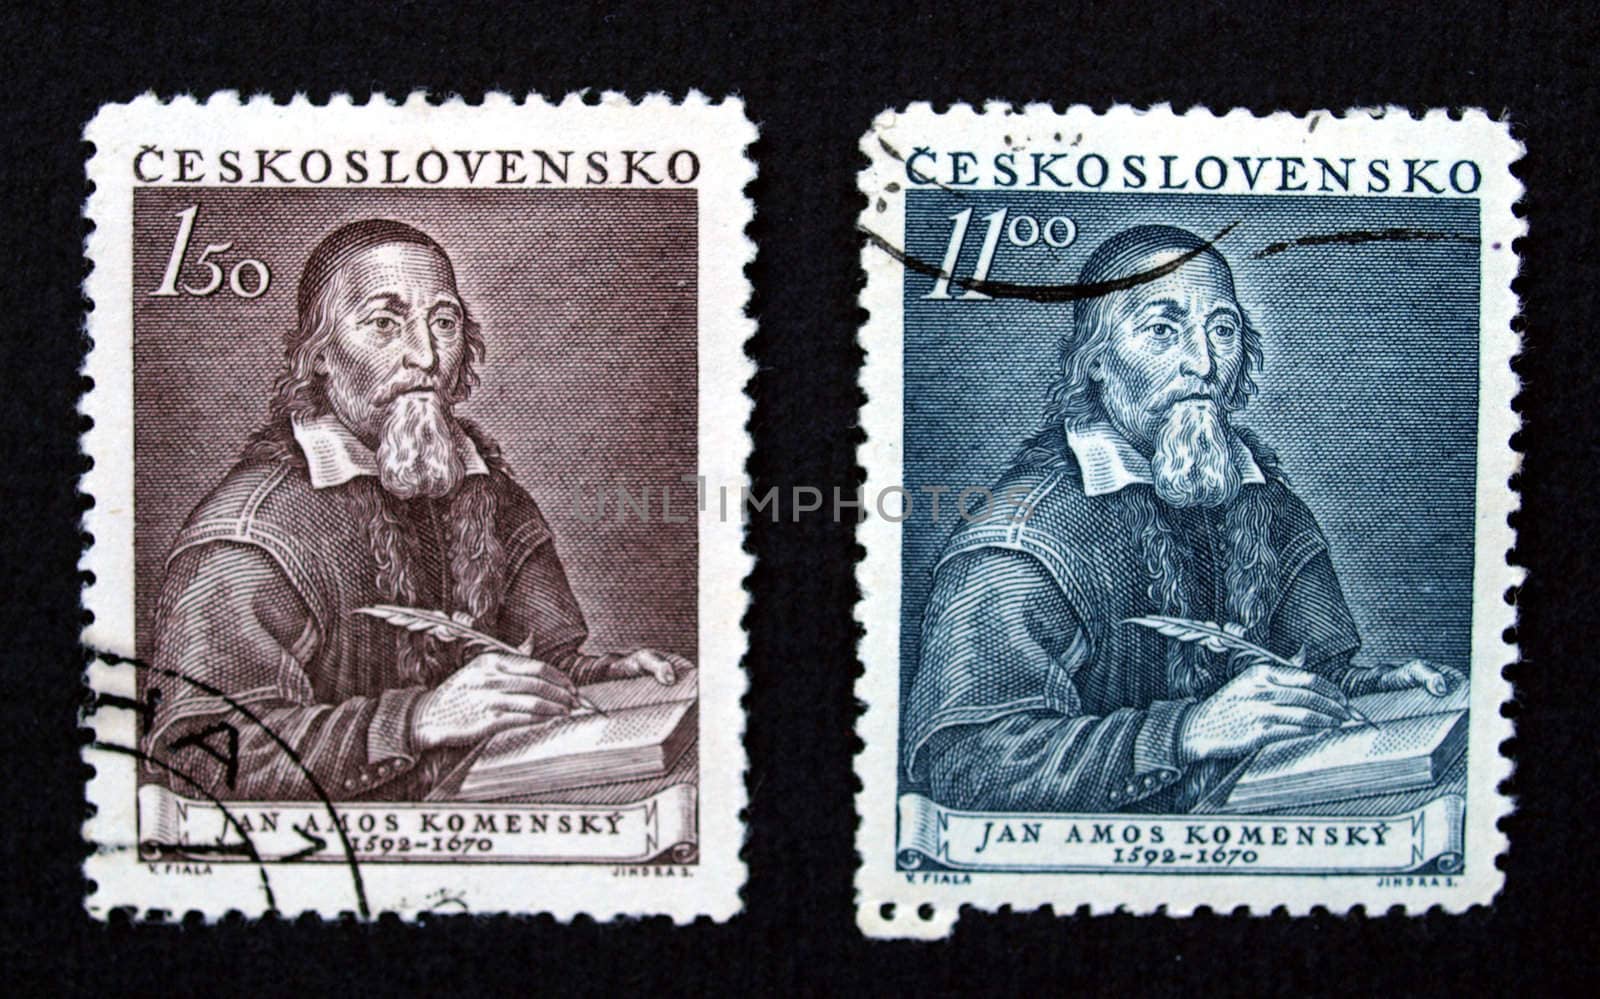 Czech stamp by paolo77